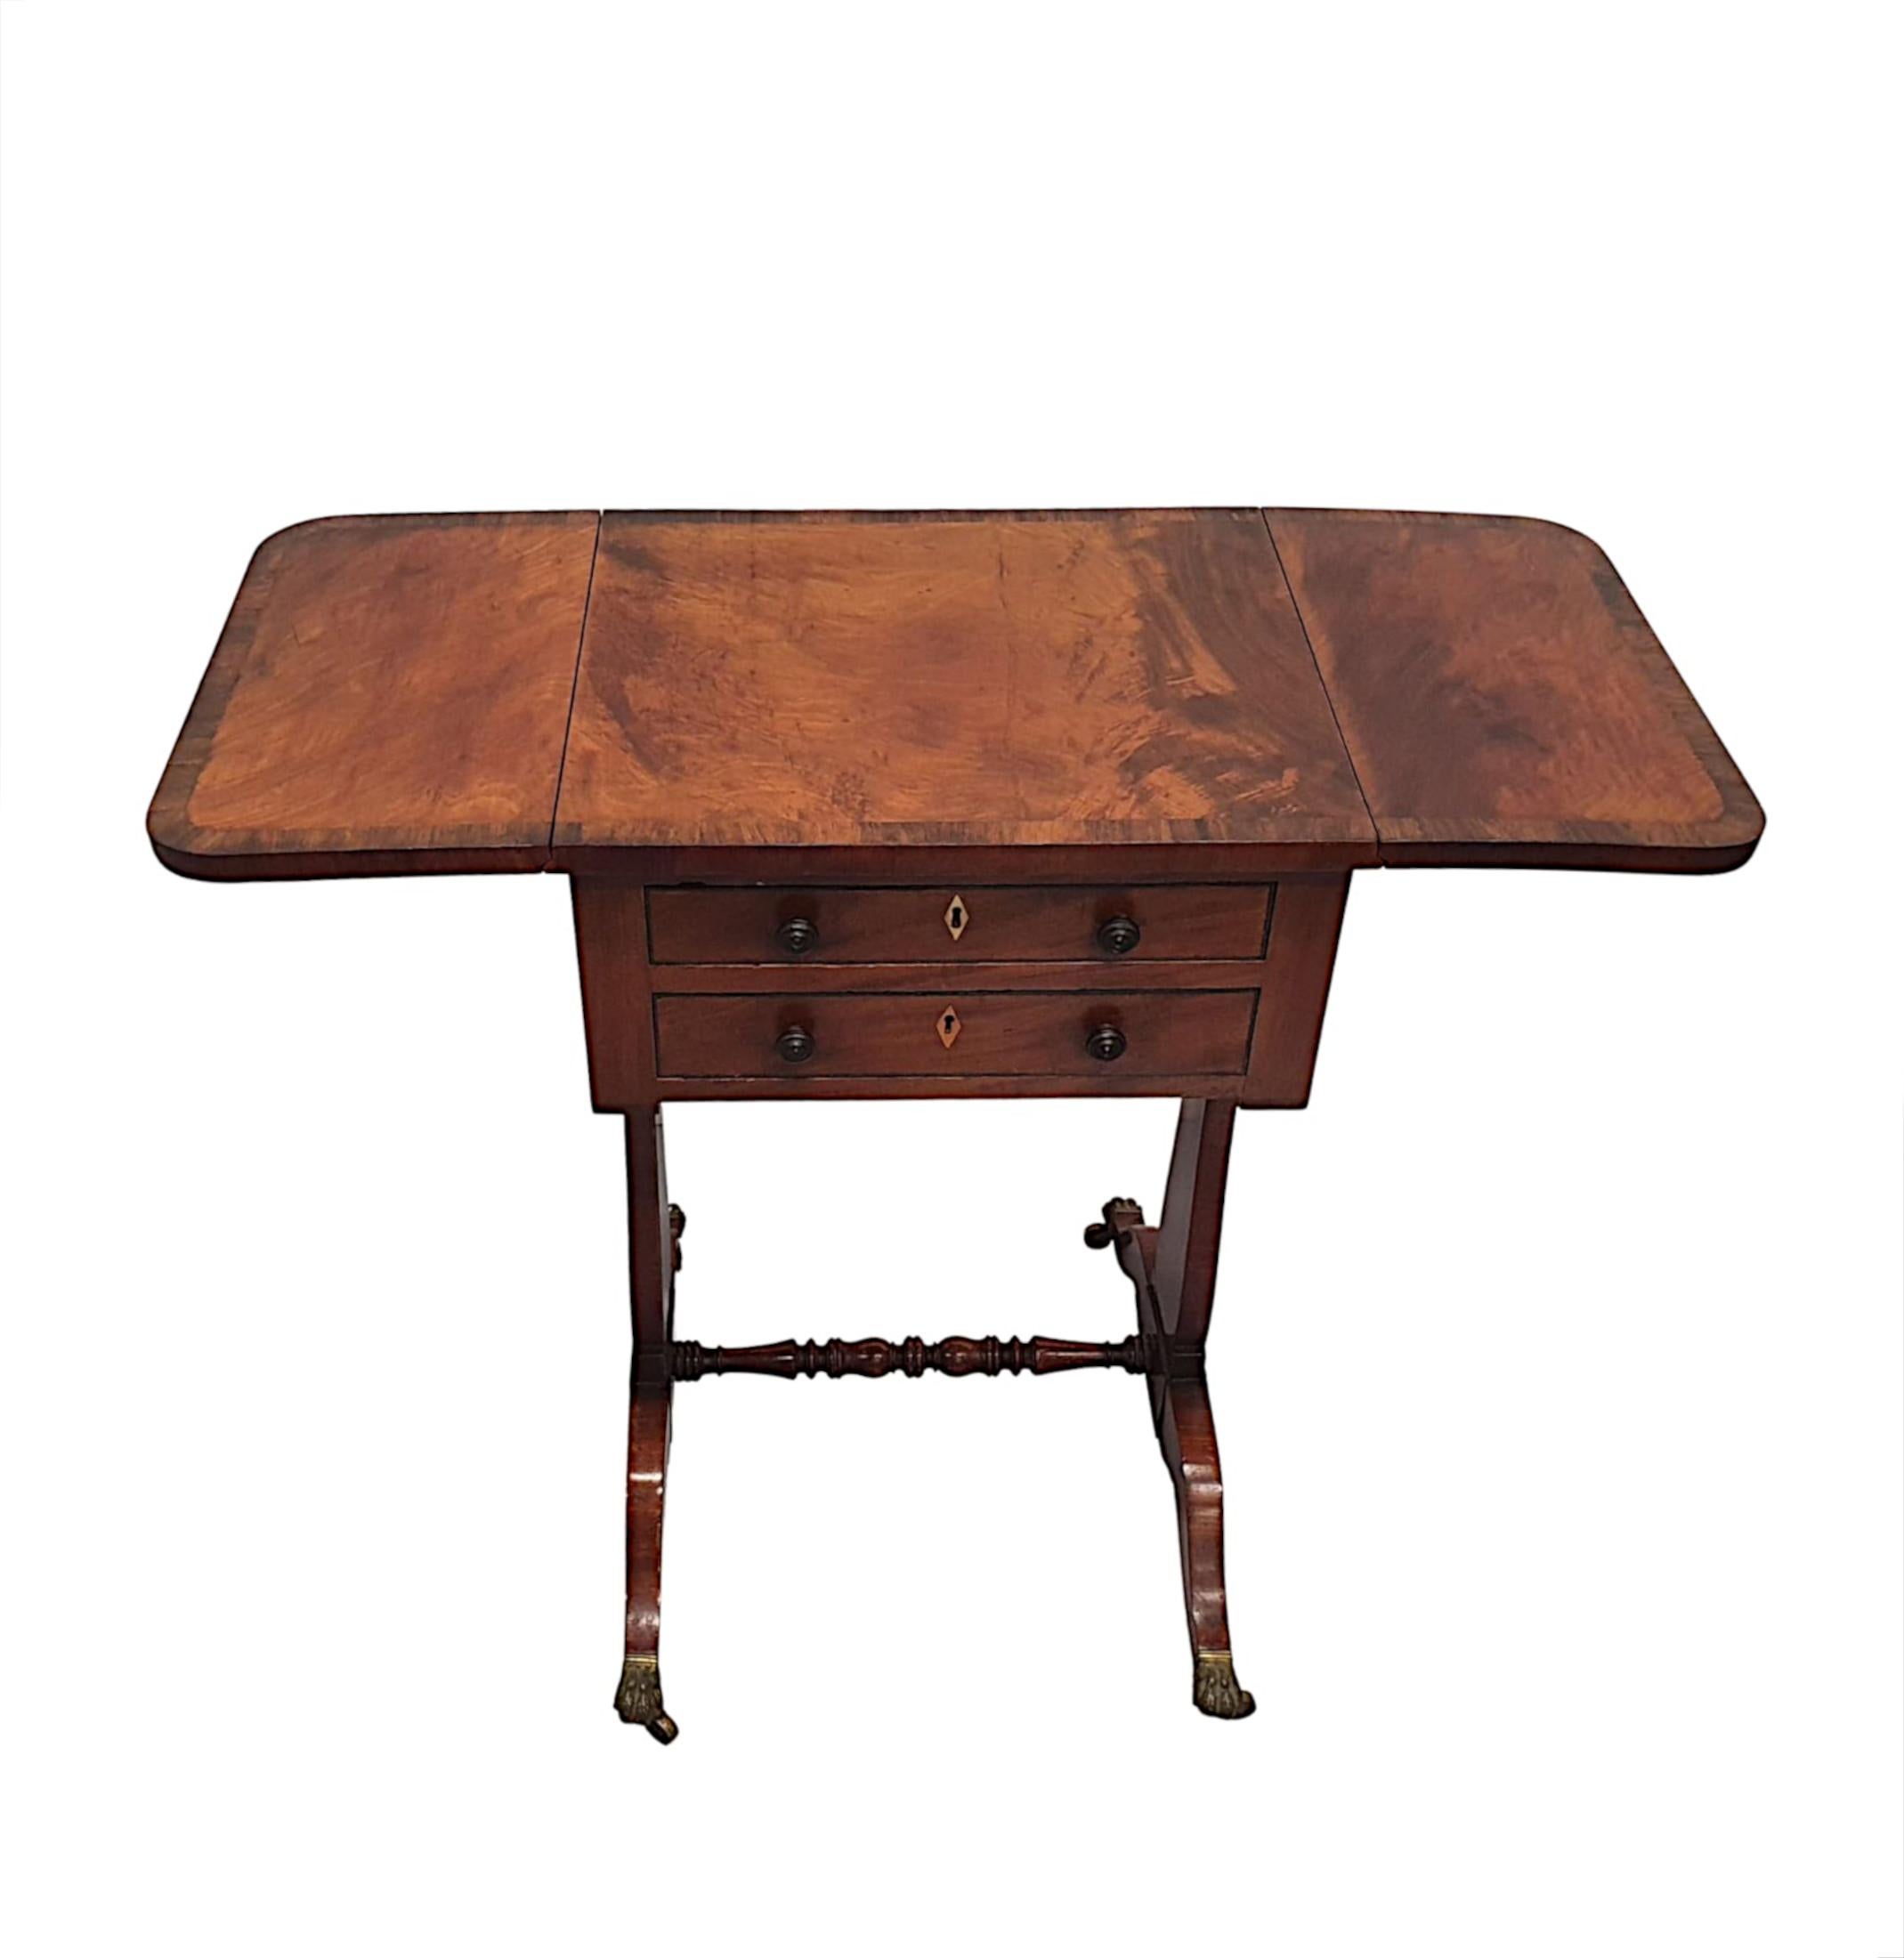 A gorgeous 19th century mahogany and fruitwood occasional or sofa table of neat proportions, finely hand carved and of fabulous quality with rich patination and grain. The well figured moulded and crossbanded top of rectangular form with twin hinged